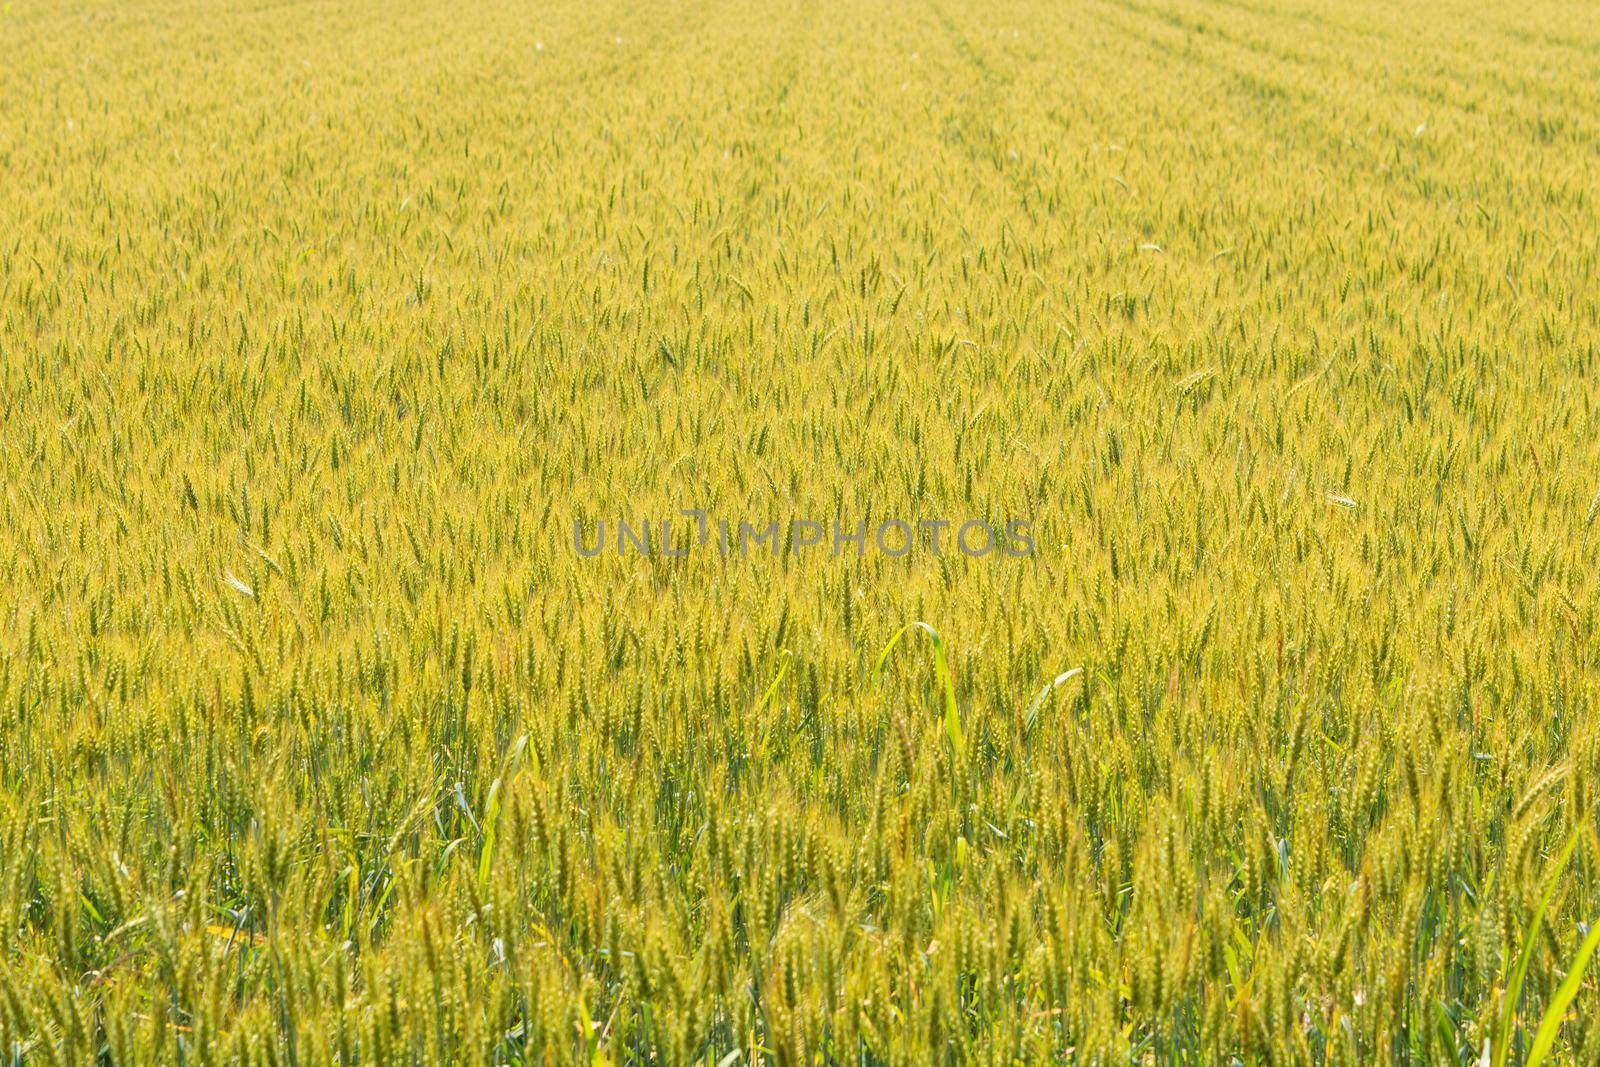 Expanse of wheat in a field under the spring sun, multitude of green ears